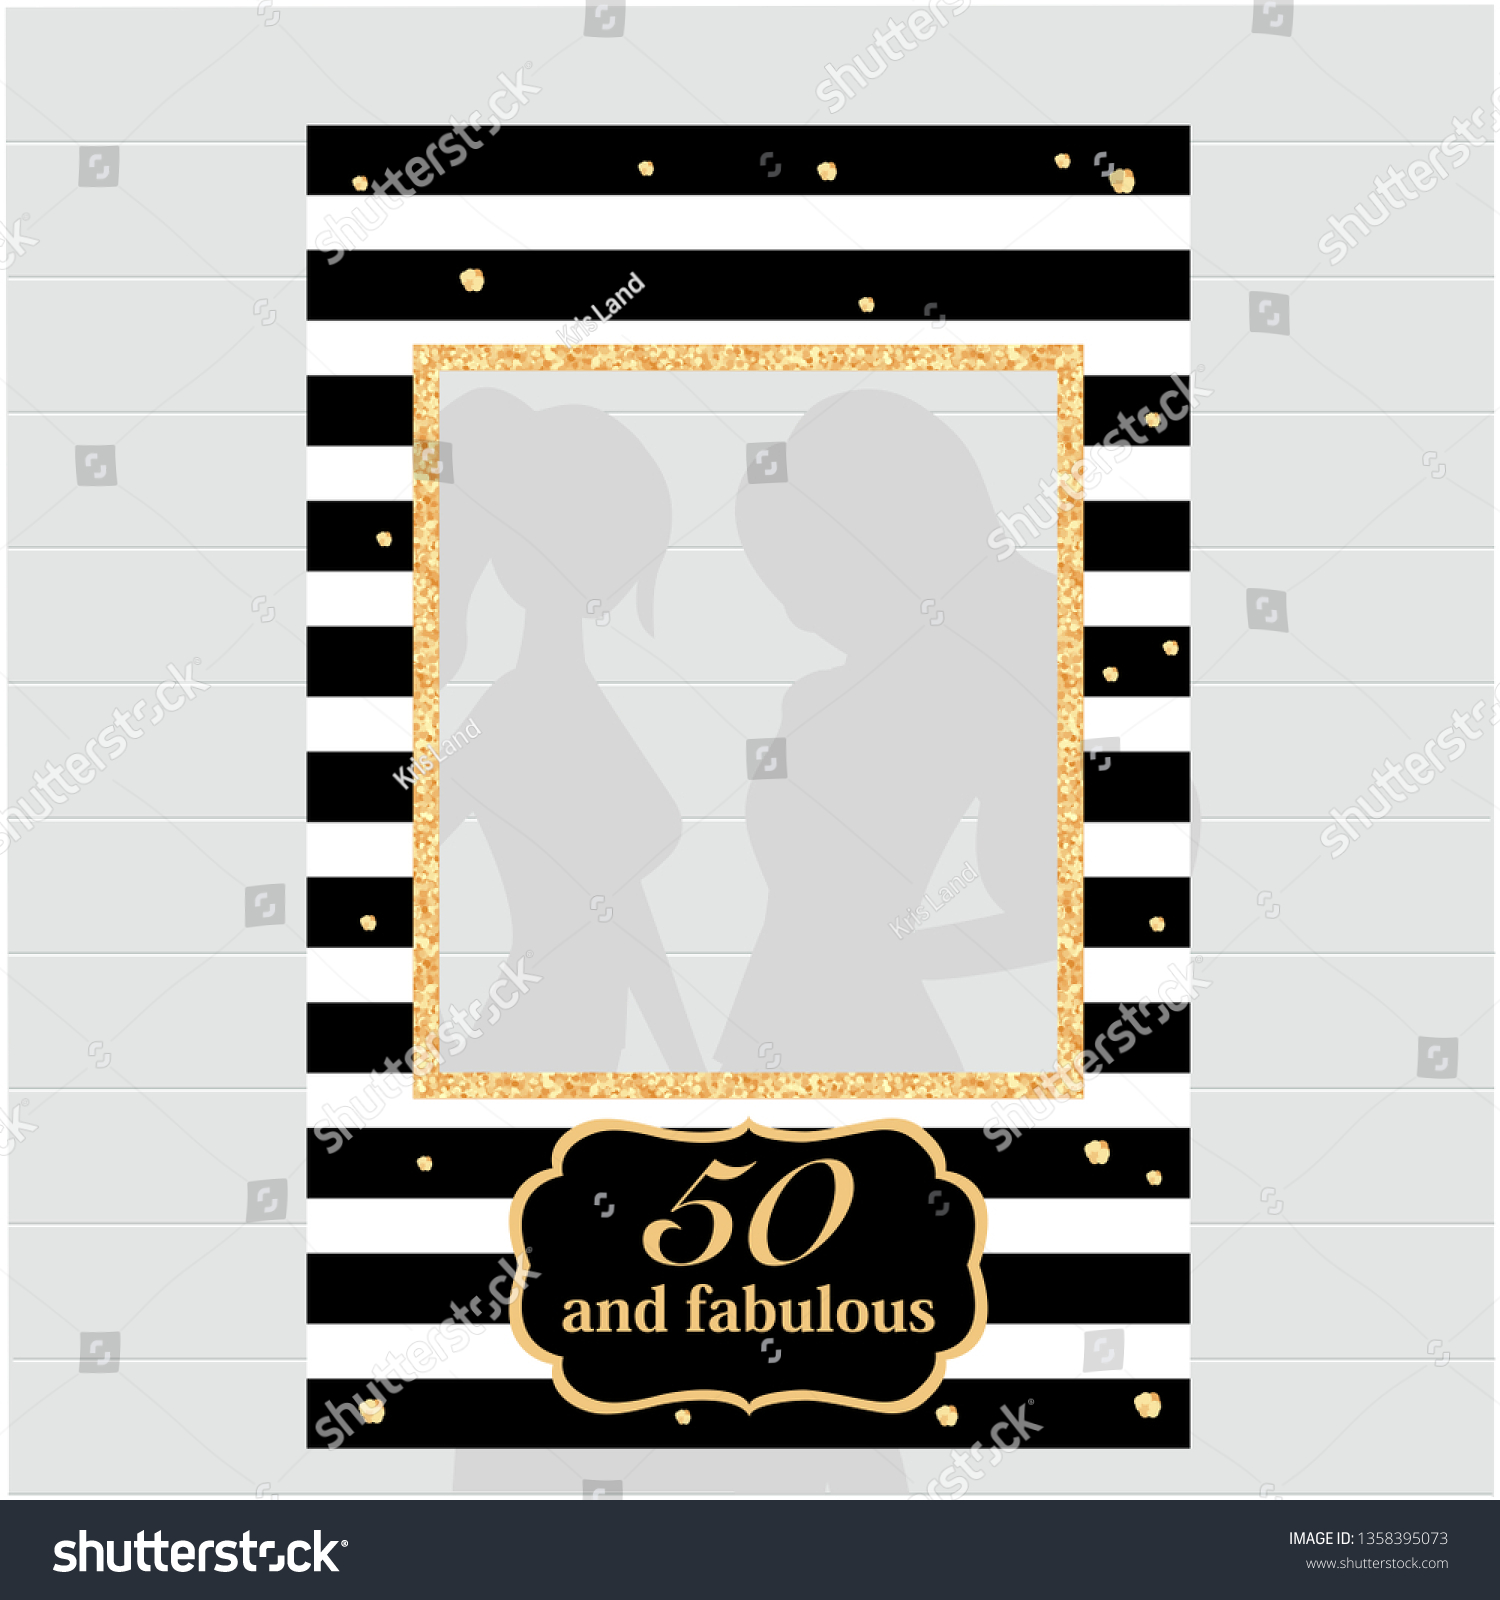 SVG of Fifty and fabulous - 50th birthday black and gold photo booth frame. Strike a Pose photoshooting with props on sticks. Vector template. svg